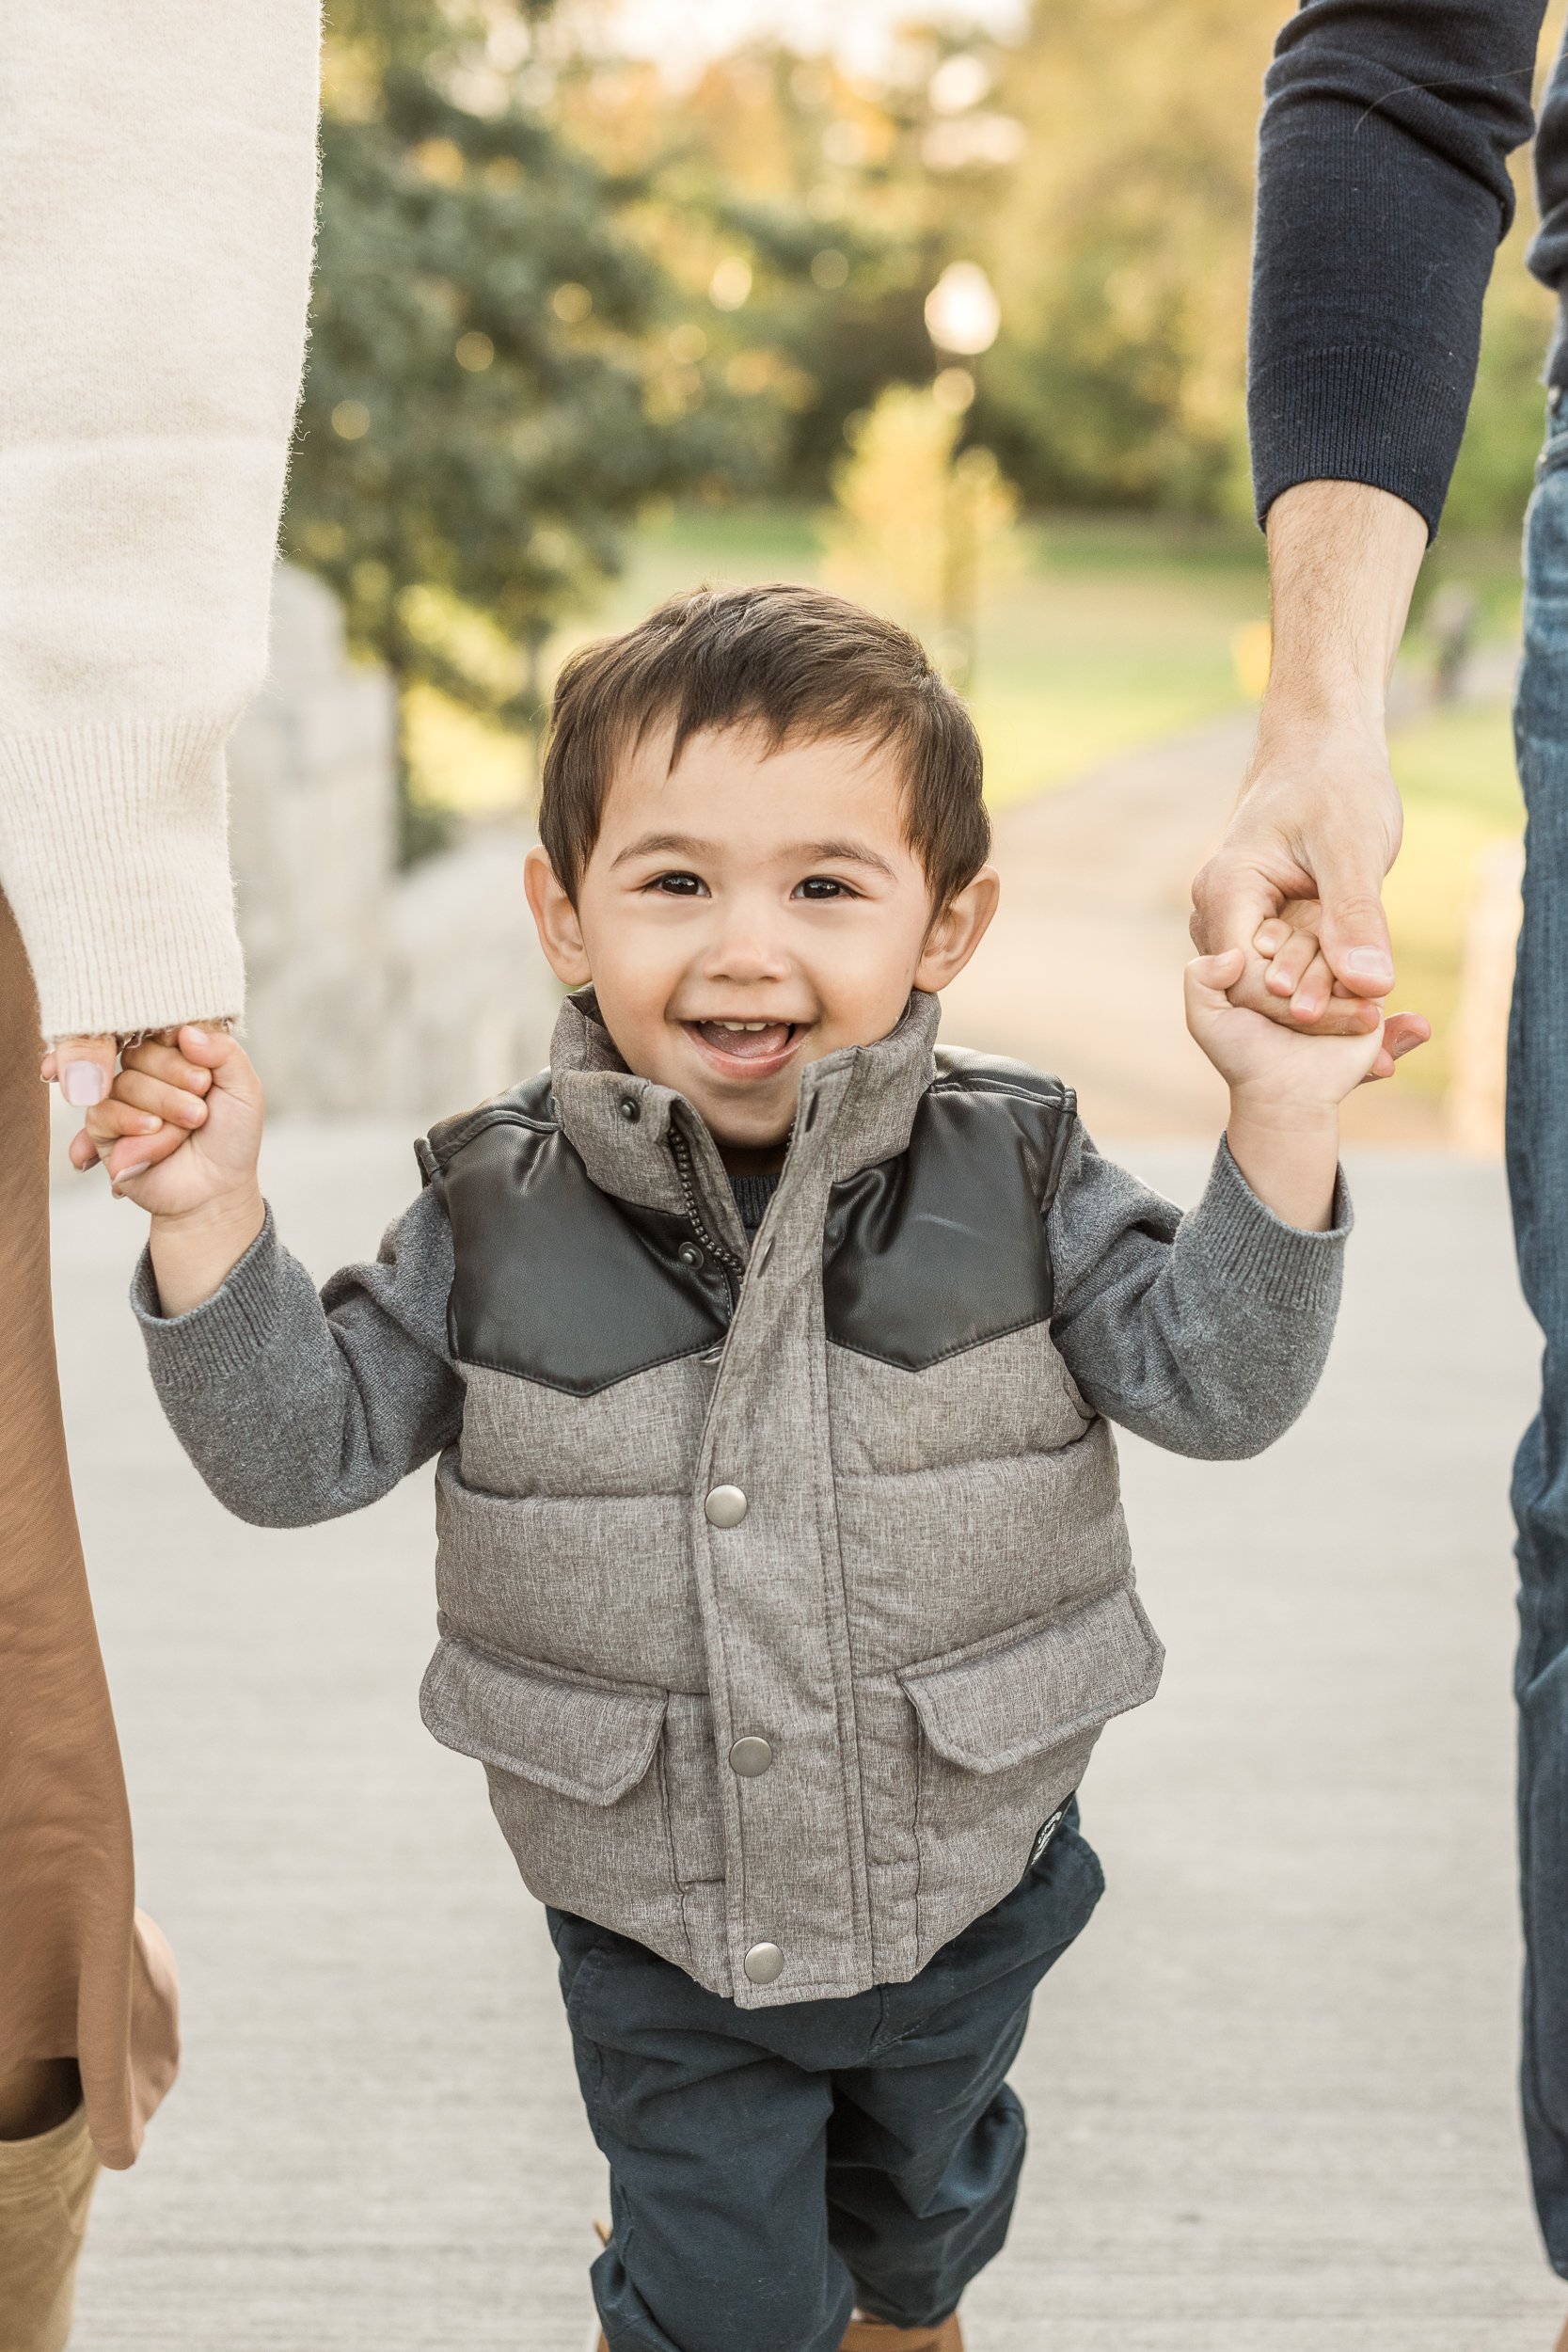  A smiling young boy with a gray sweater and long sleeve shirt holds on to his parent's hands to walk by Nicole Hawkins Photography of New Jersey. young family photographer new jersey family portraits #nicolehawkinsphotography #nicolehawkinsfamilies 